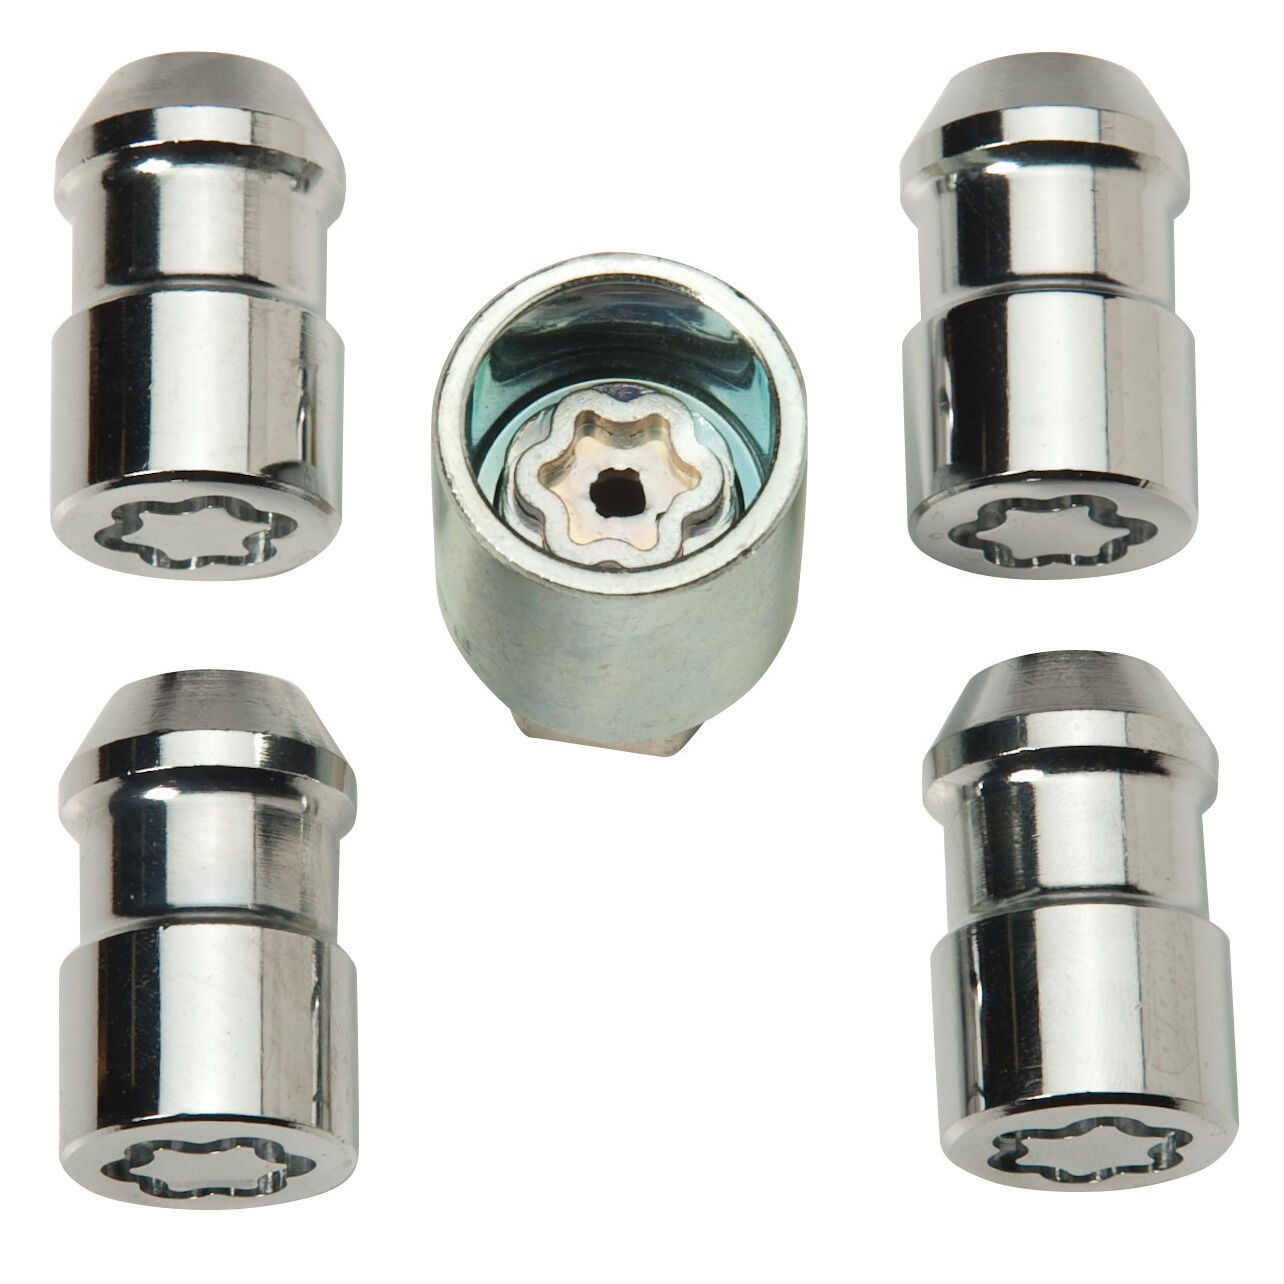 5 Pack Spare Lug Nuts 1/2" x 20 Boat Utility Trailer Wheel